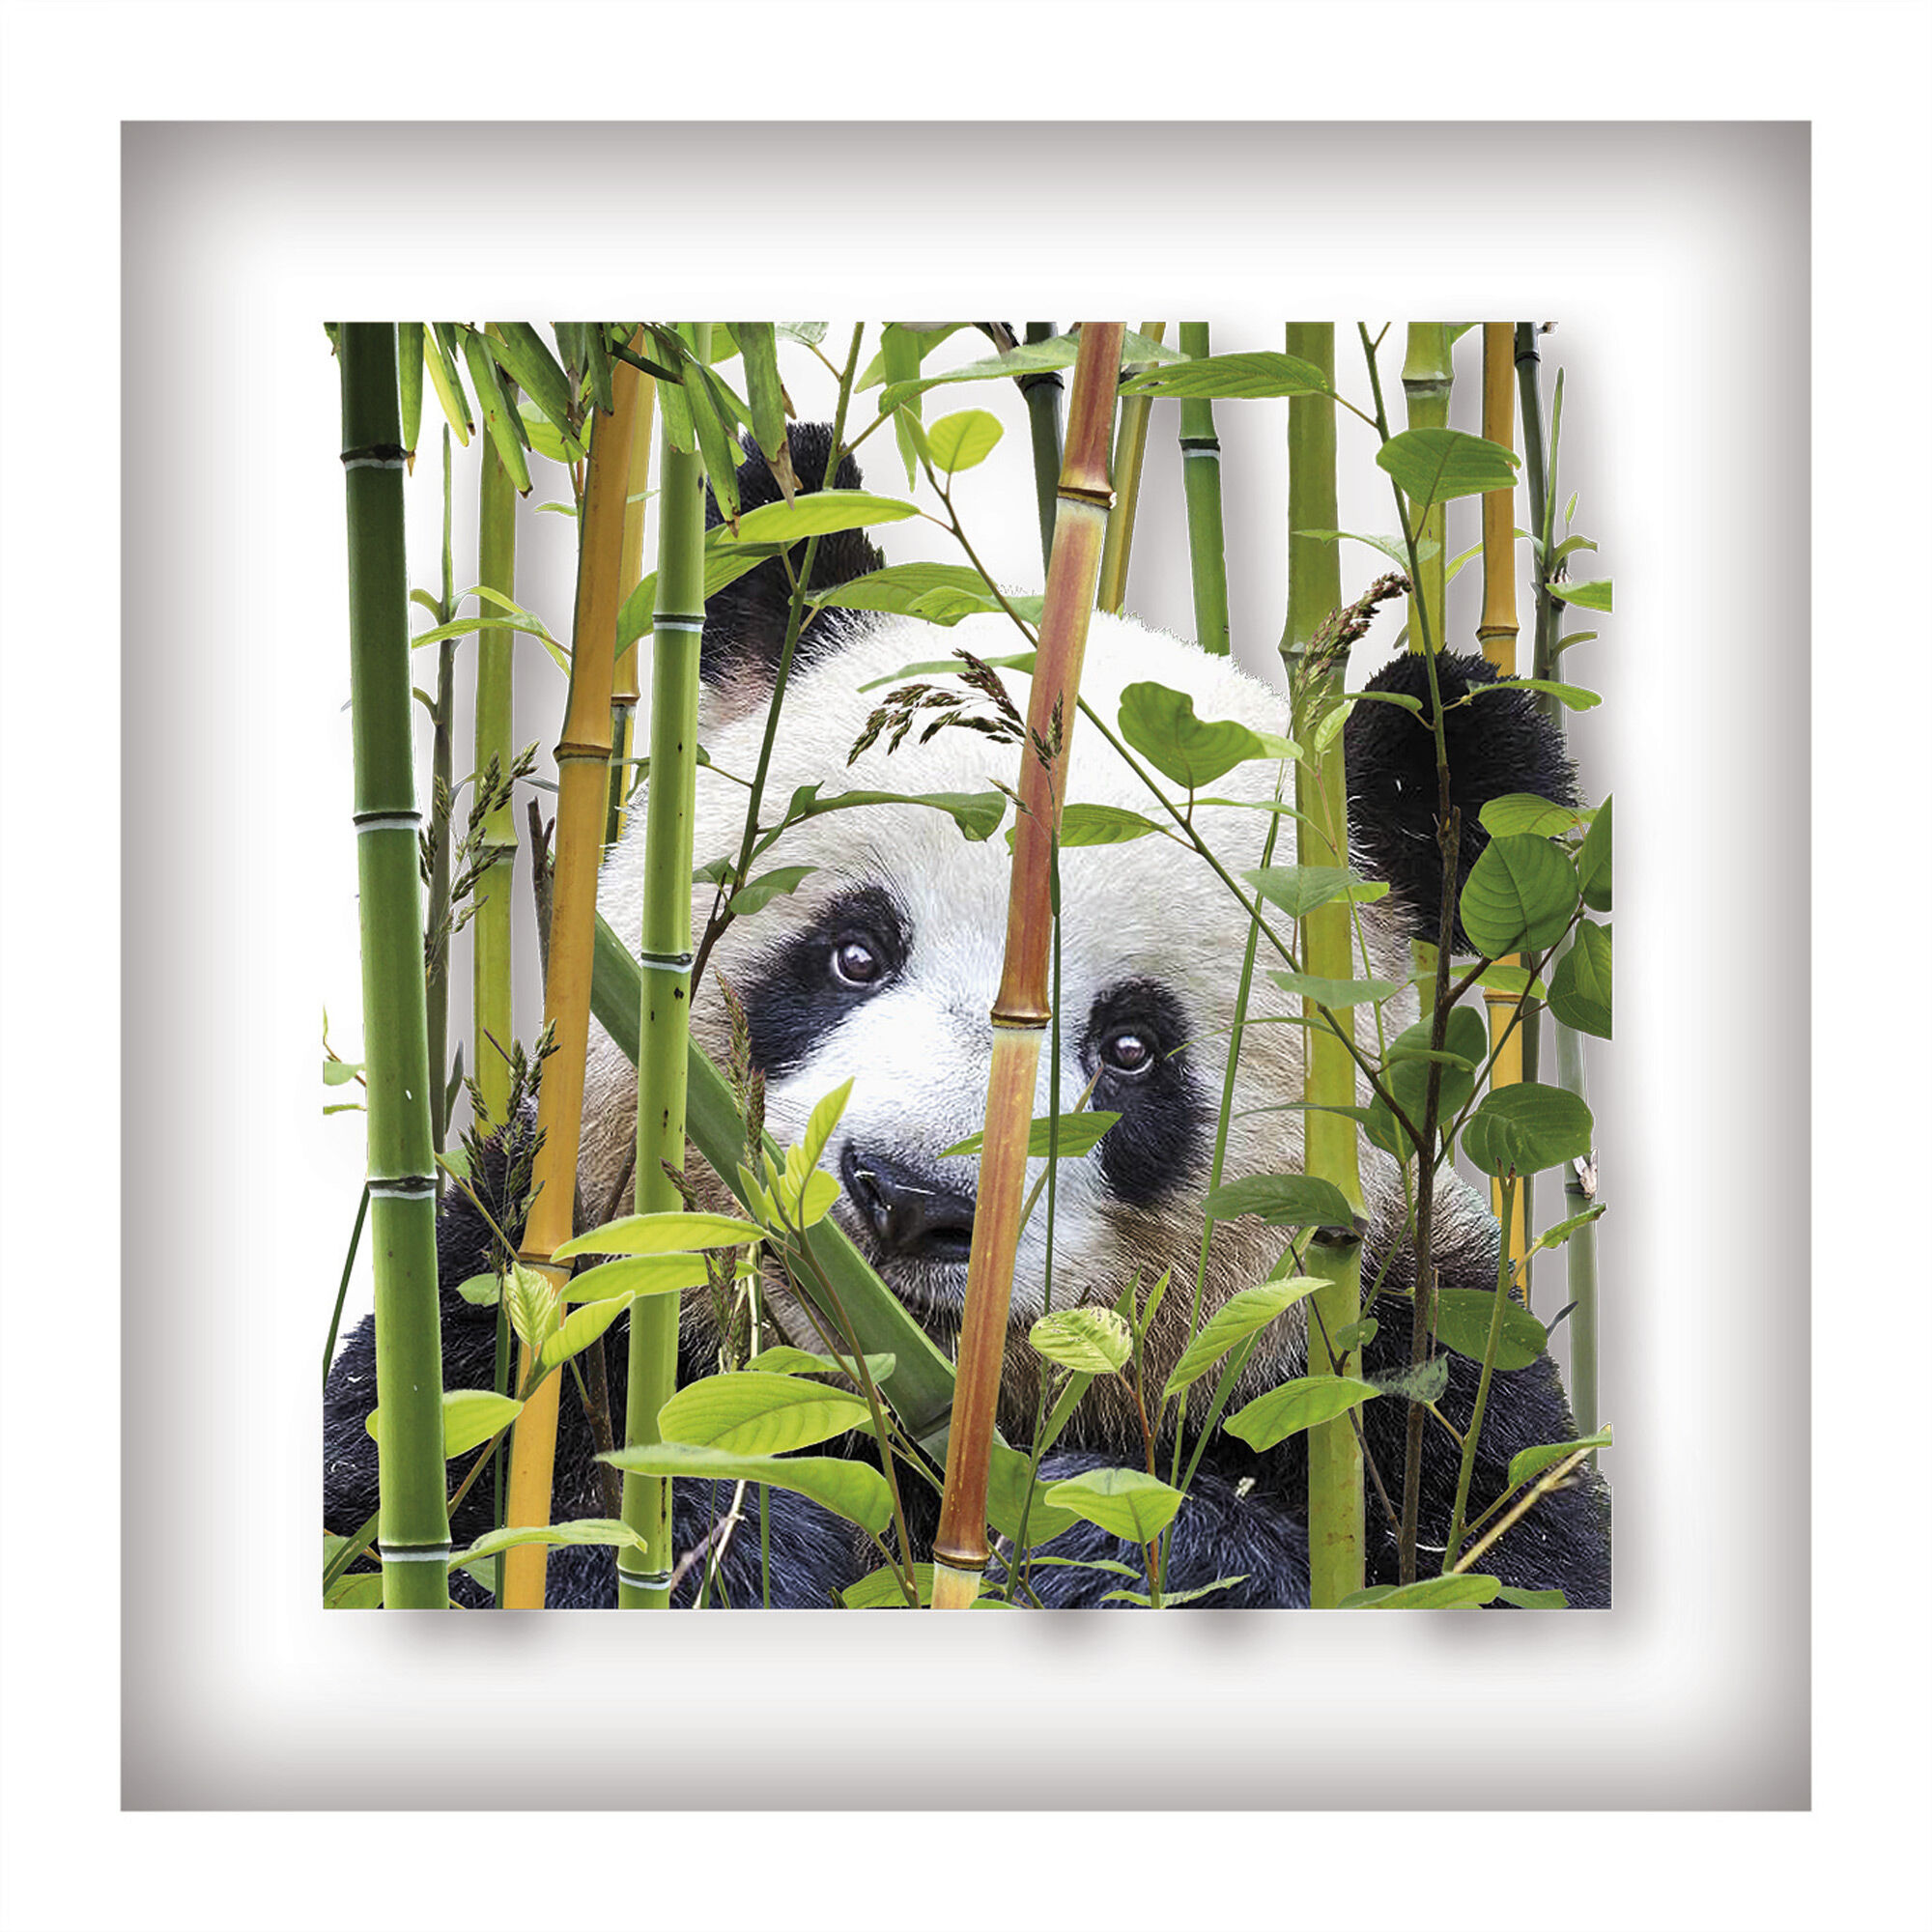 Picture "Panda" (2018) by Andreas Lutherer